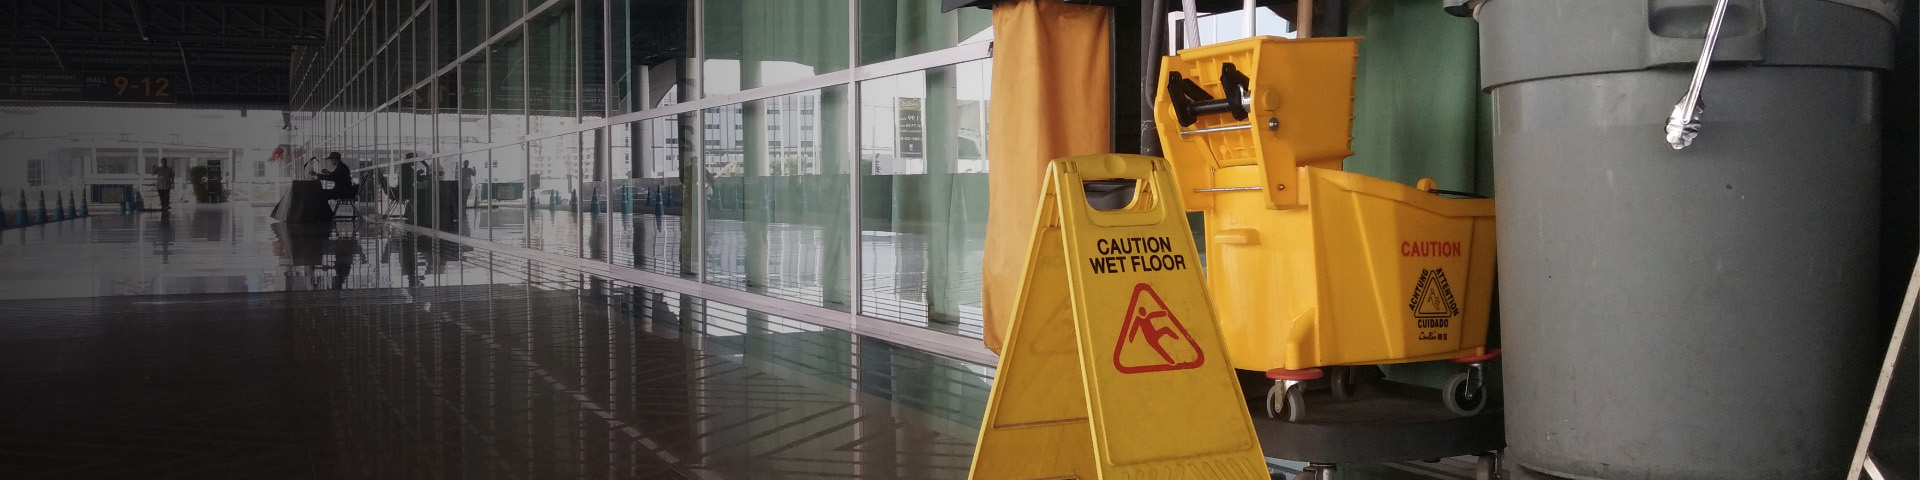 caution wet floor sign, mop bucket and garbage can at commercial space